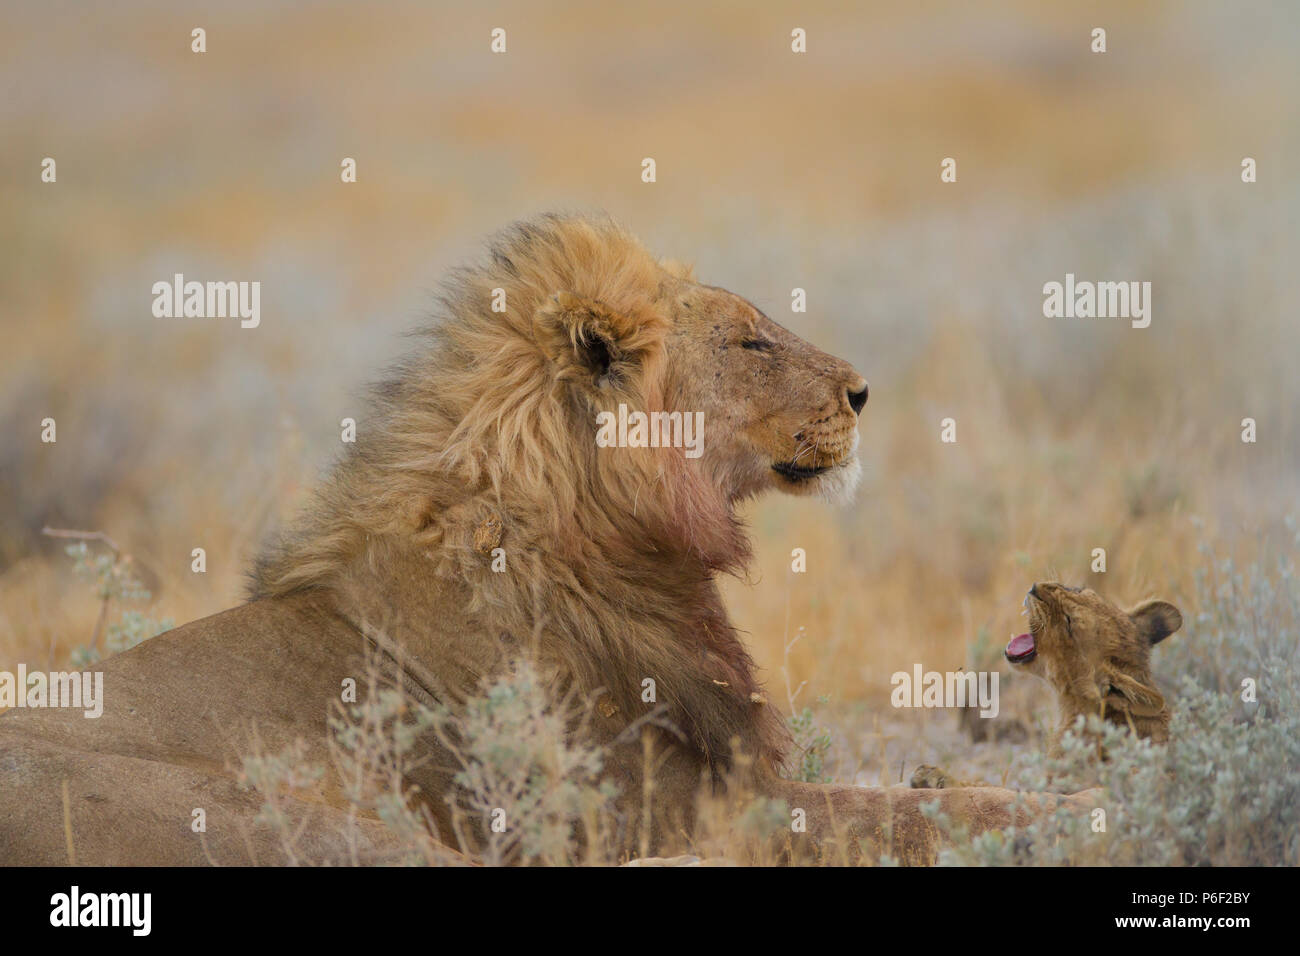 Lion Cubs Are Introduced To Their Father, Predator Perspective